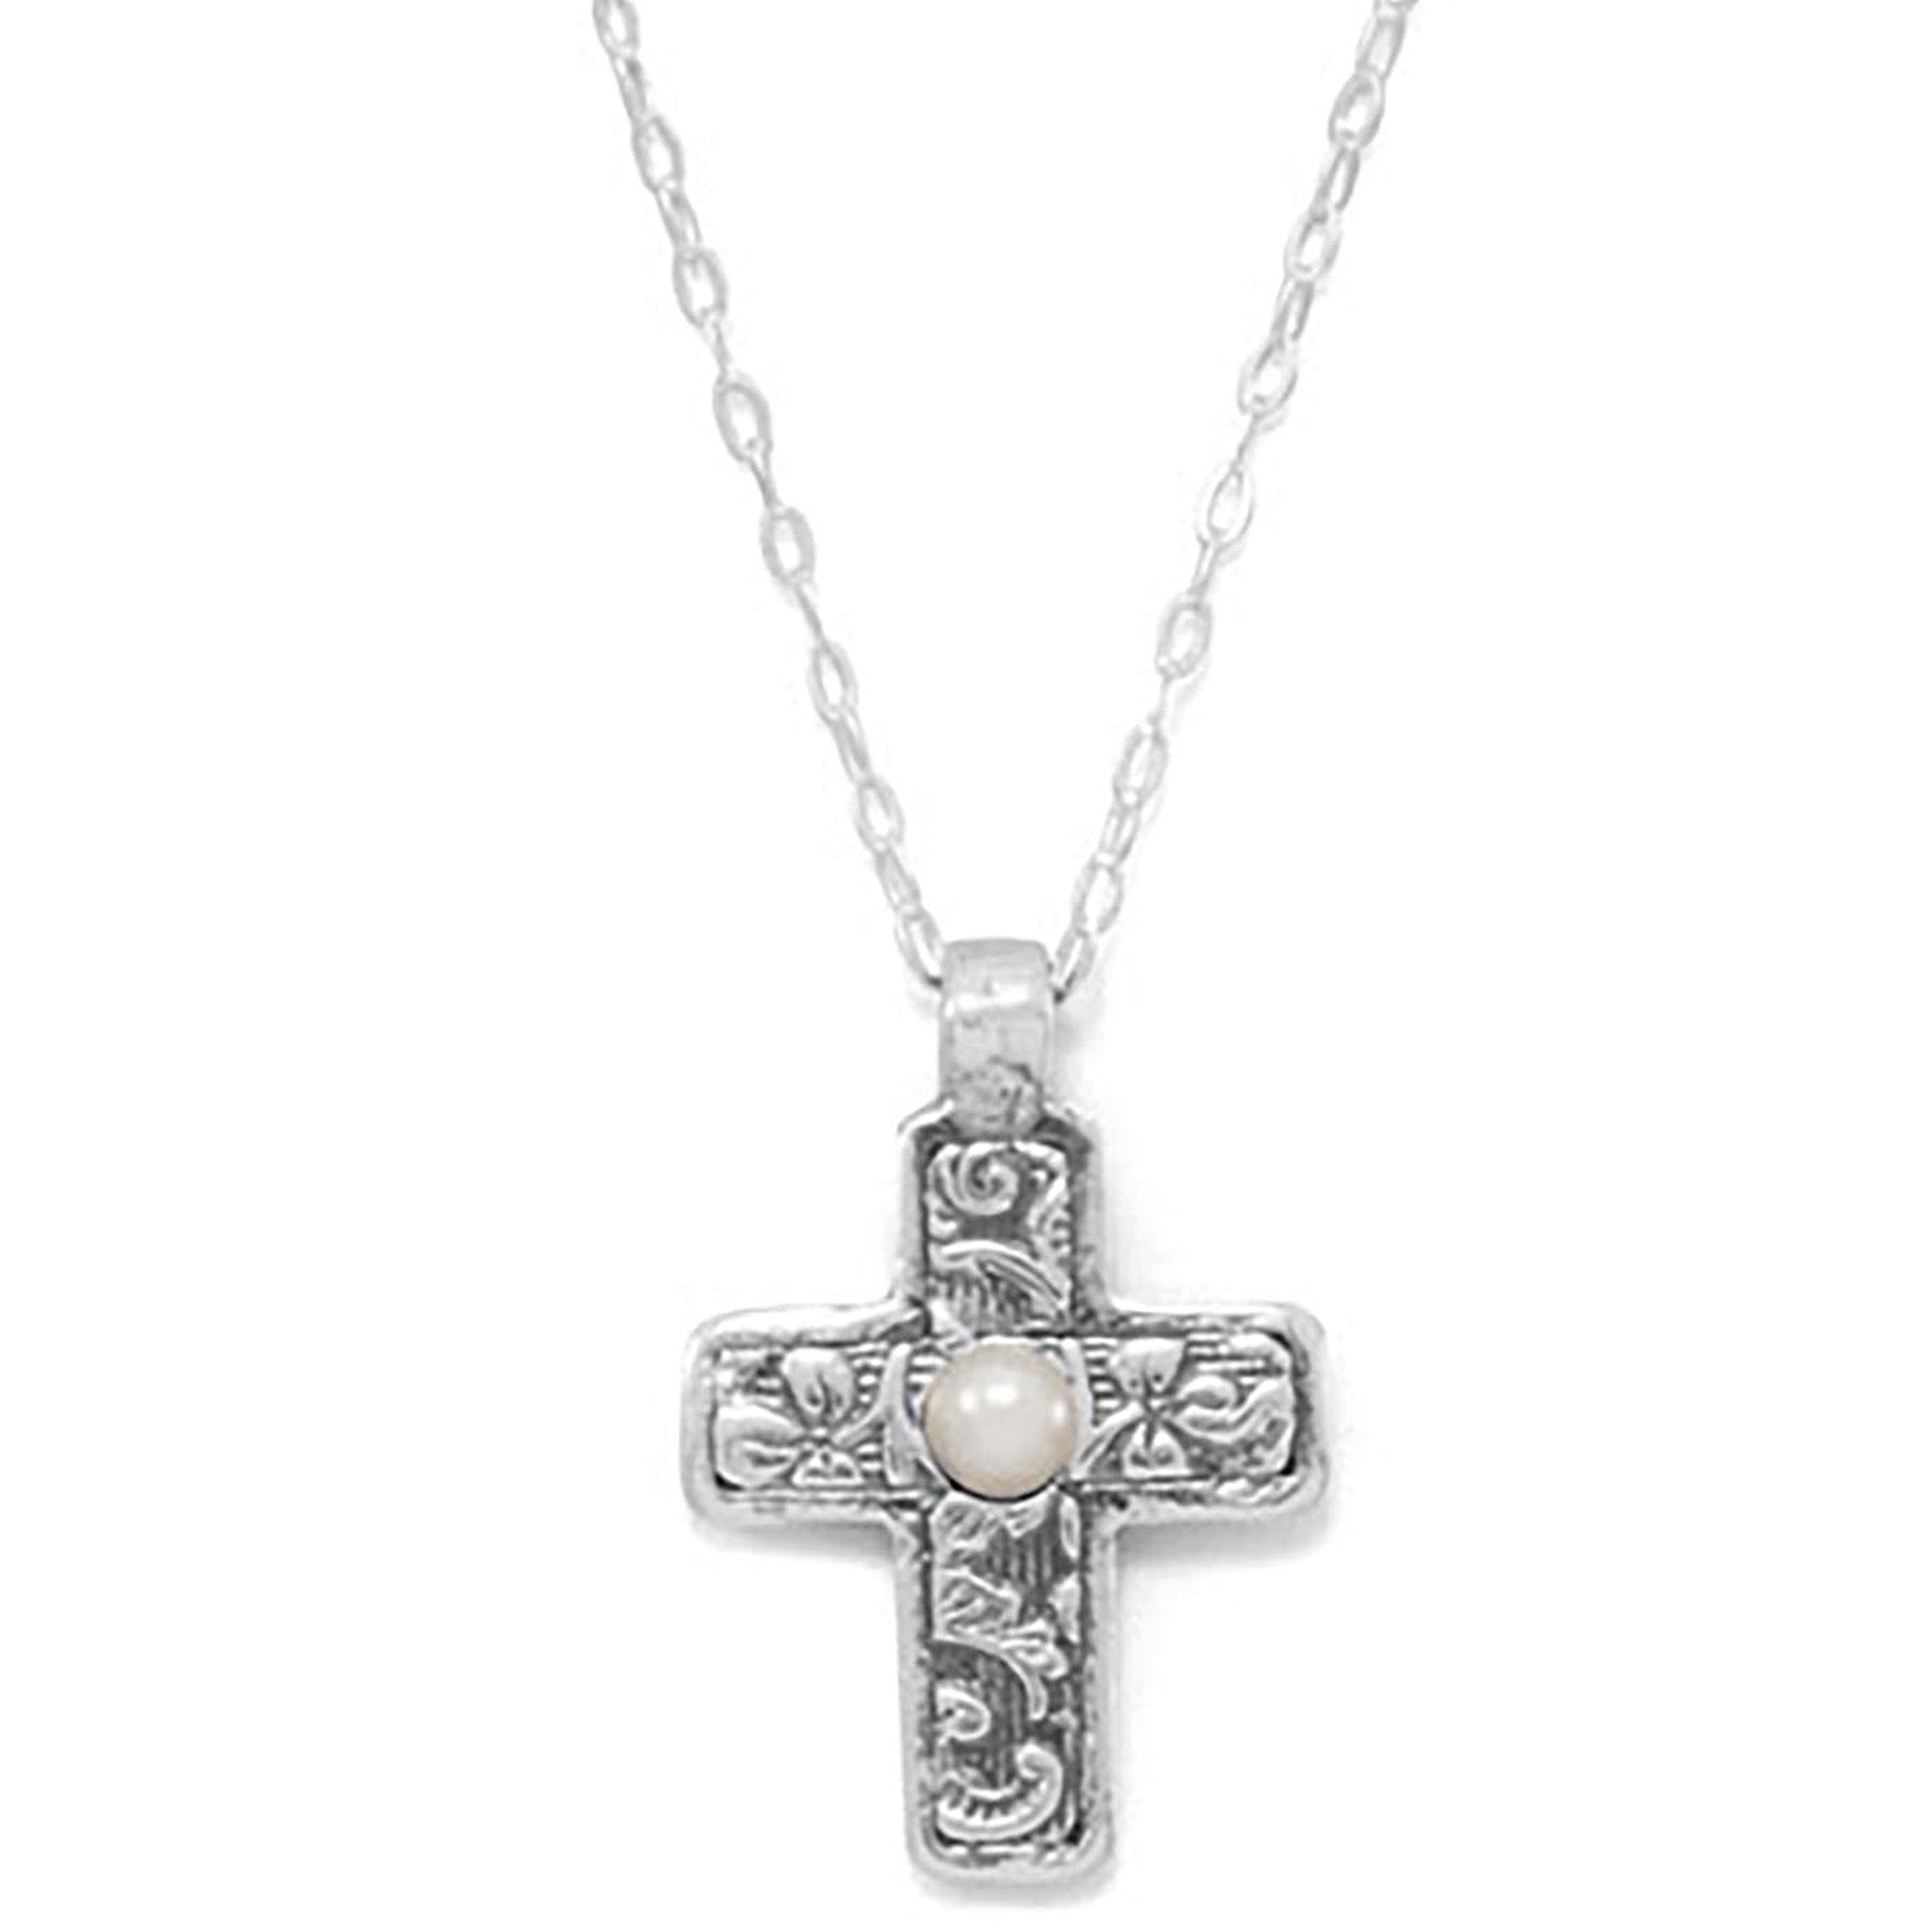 Reversible Cross Charm Necklace